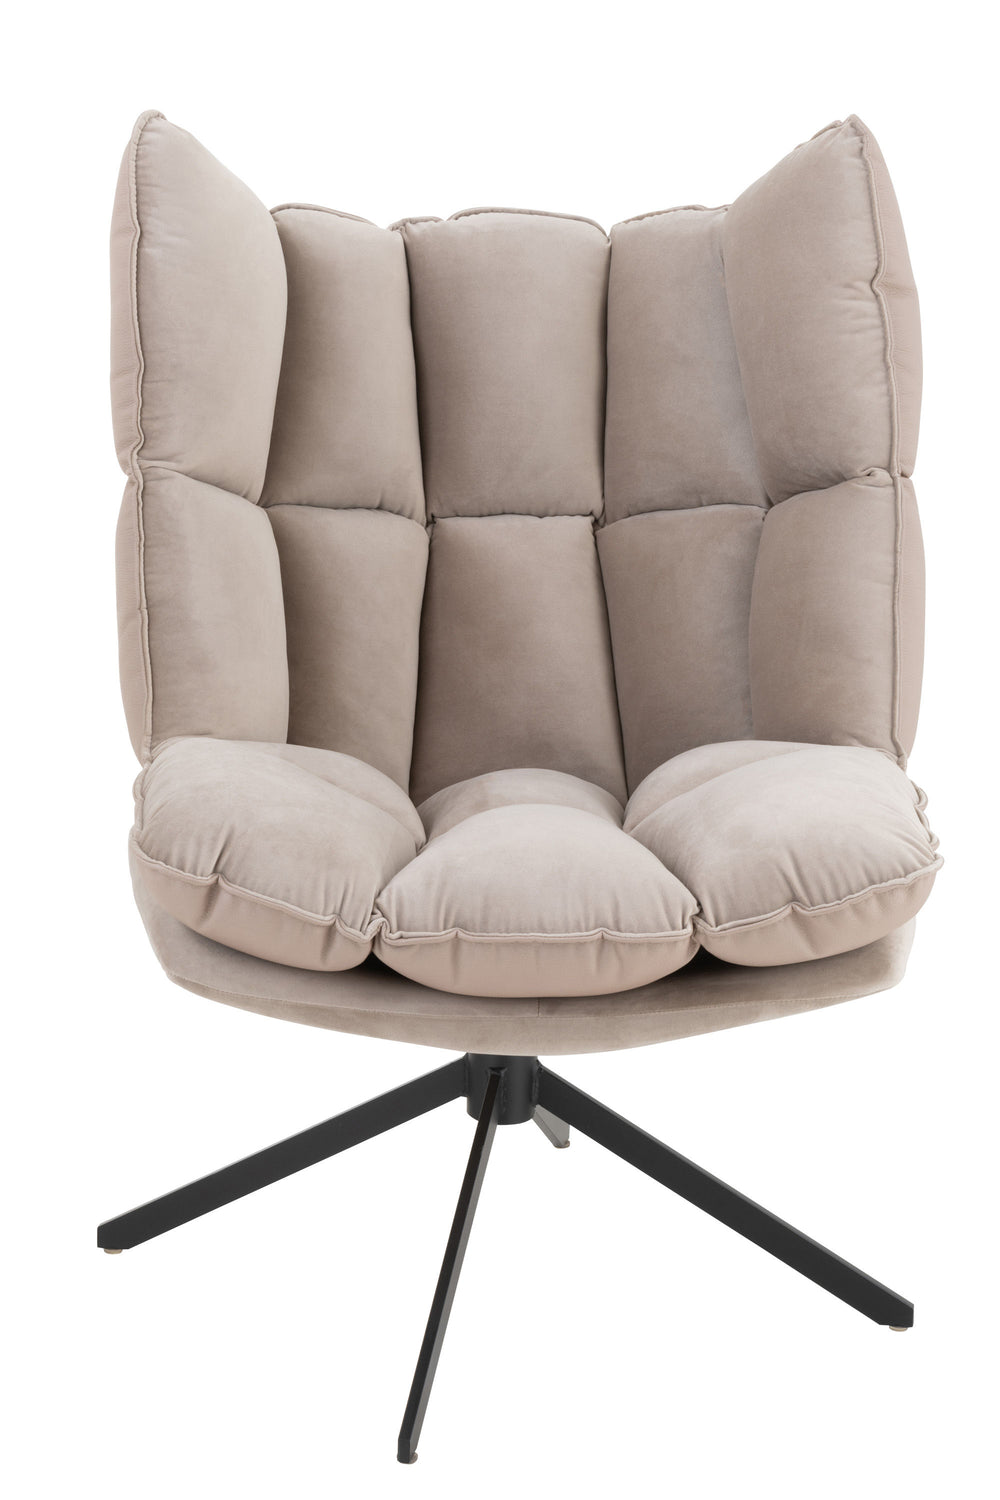 J-Line by Jolipa CHAIR RELAX CUSHION ON FRAME TEXTILE/METAL EXTRA LIGHT GREY